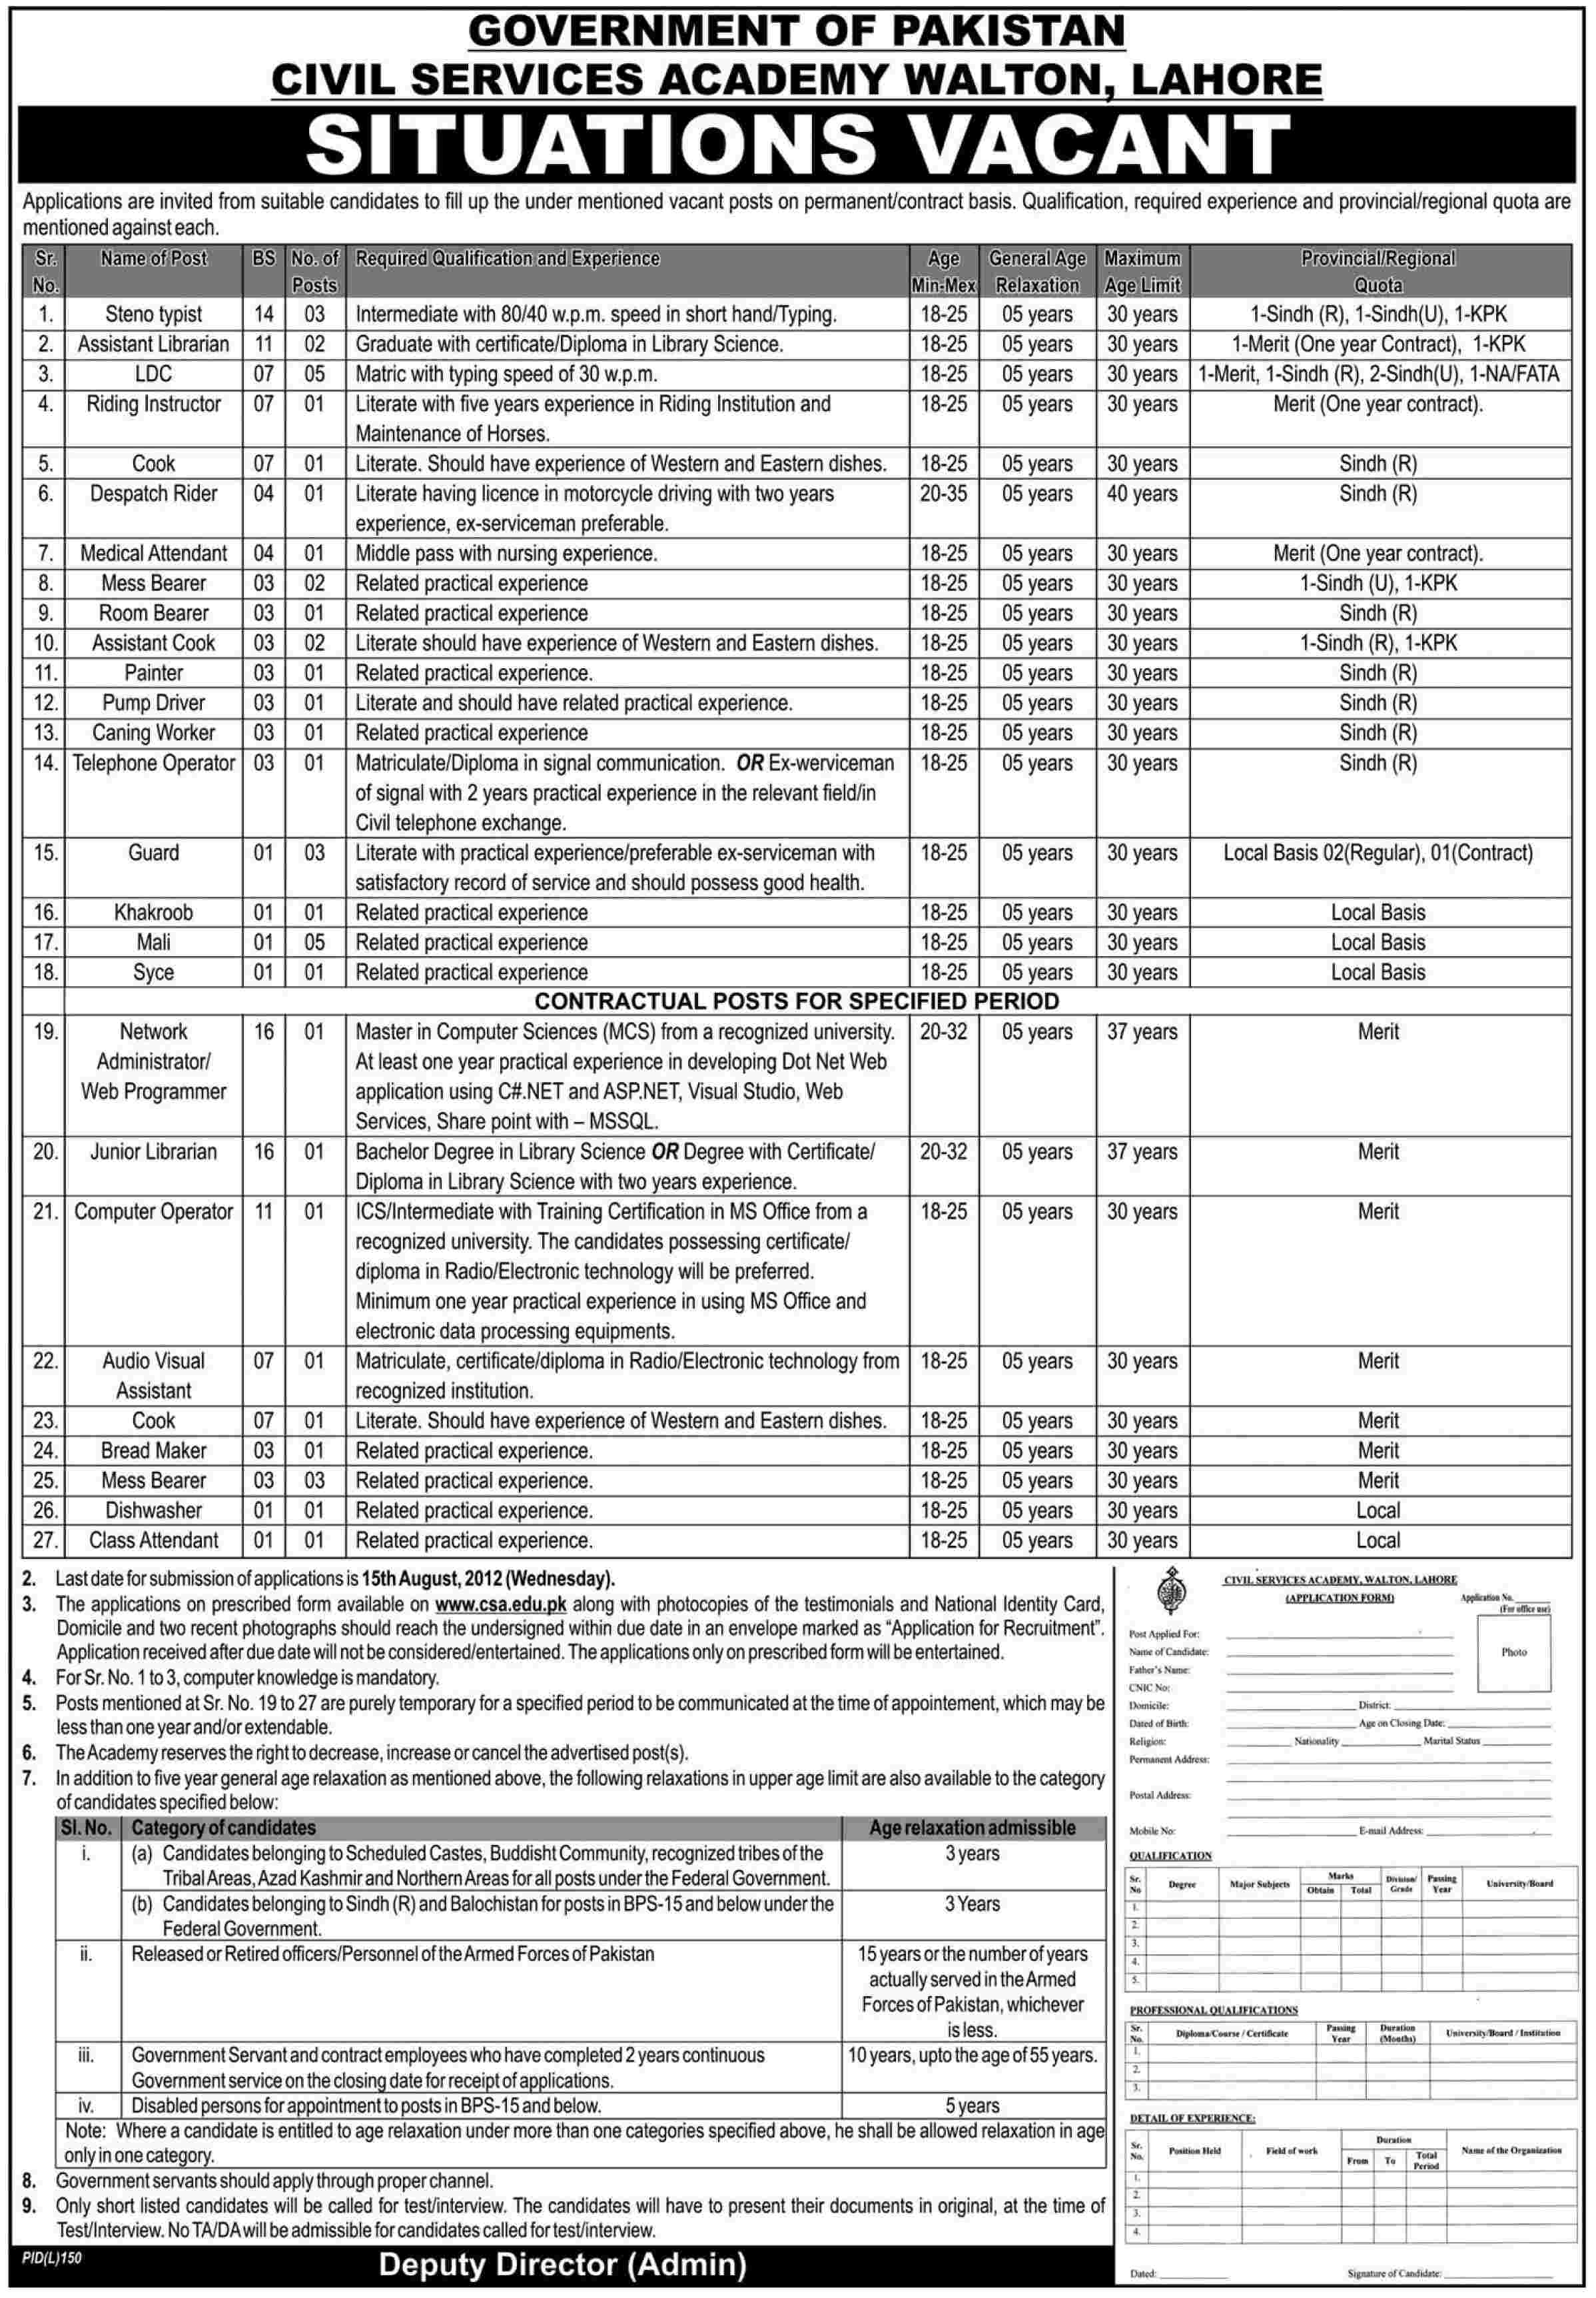 Civil Services Academy Government of Pakistan Requires IT and Admin Support Staff (Government Job)